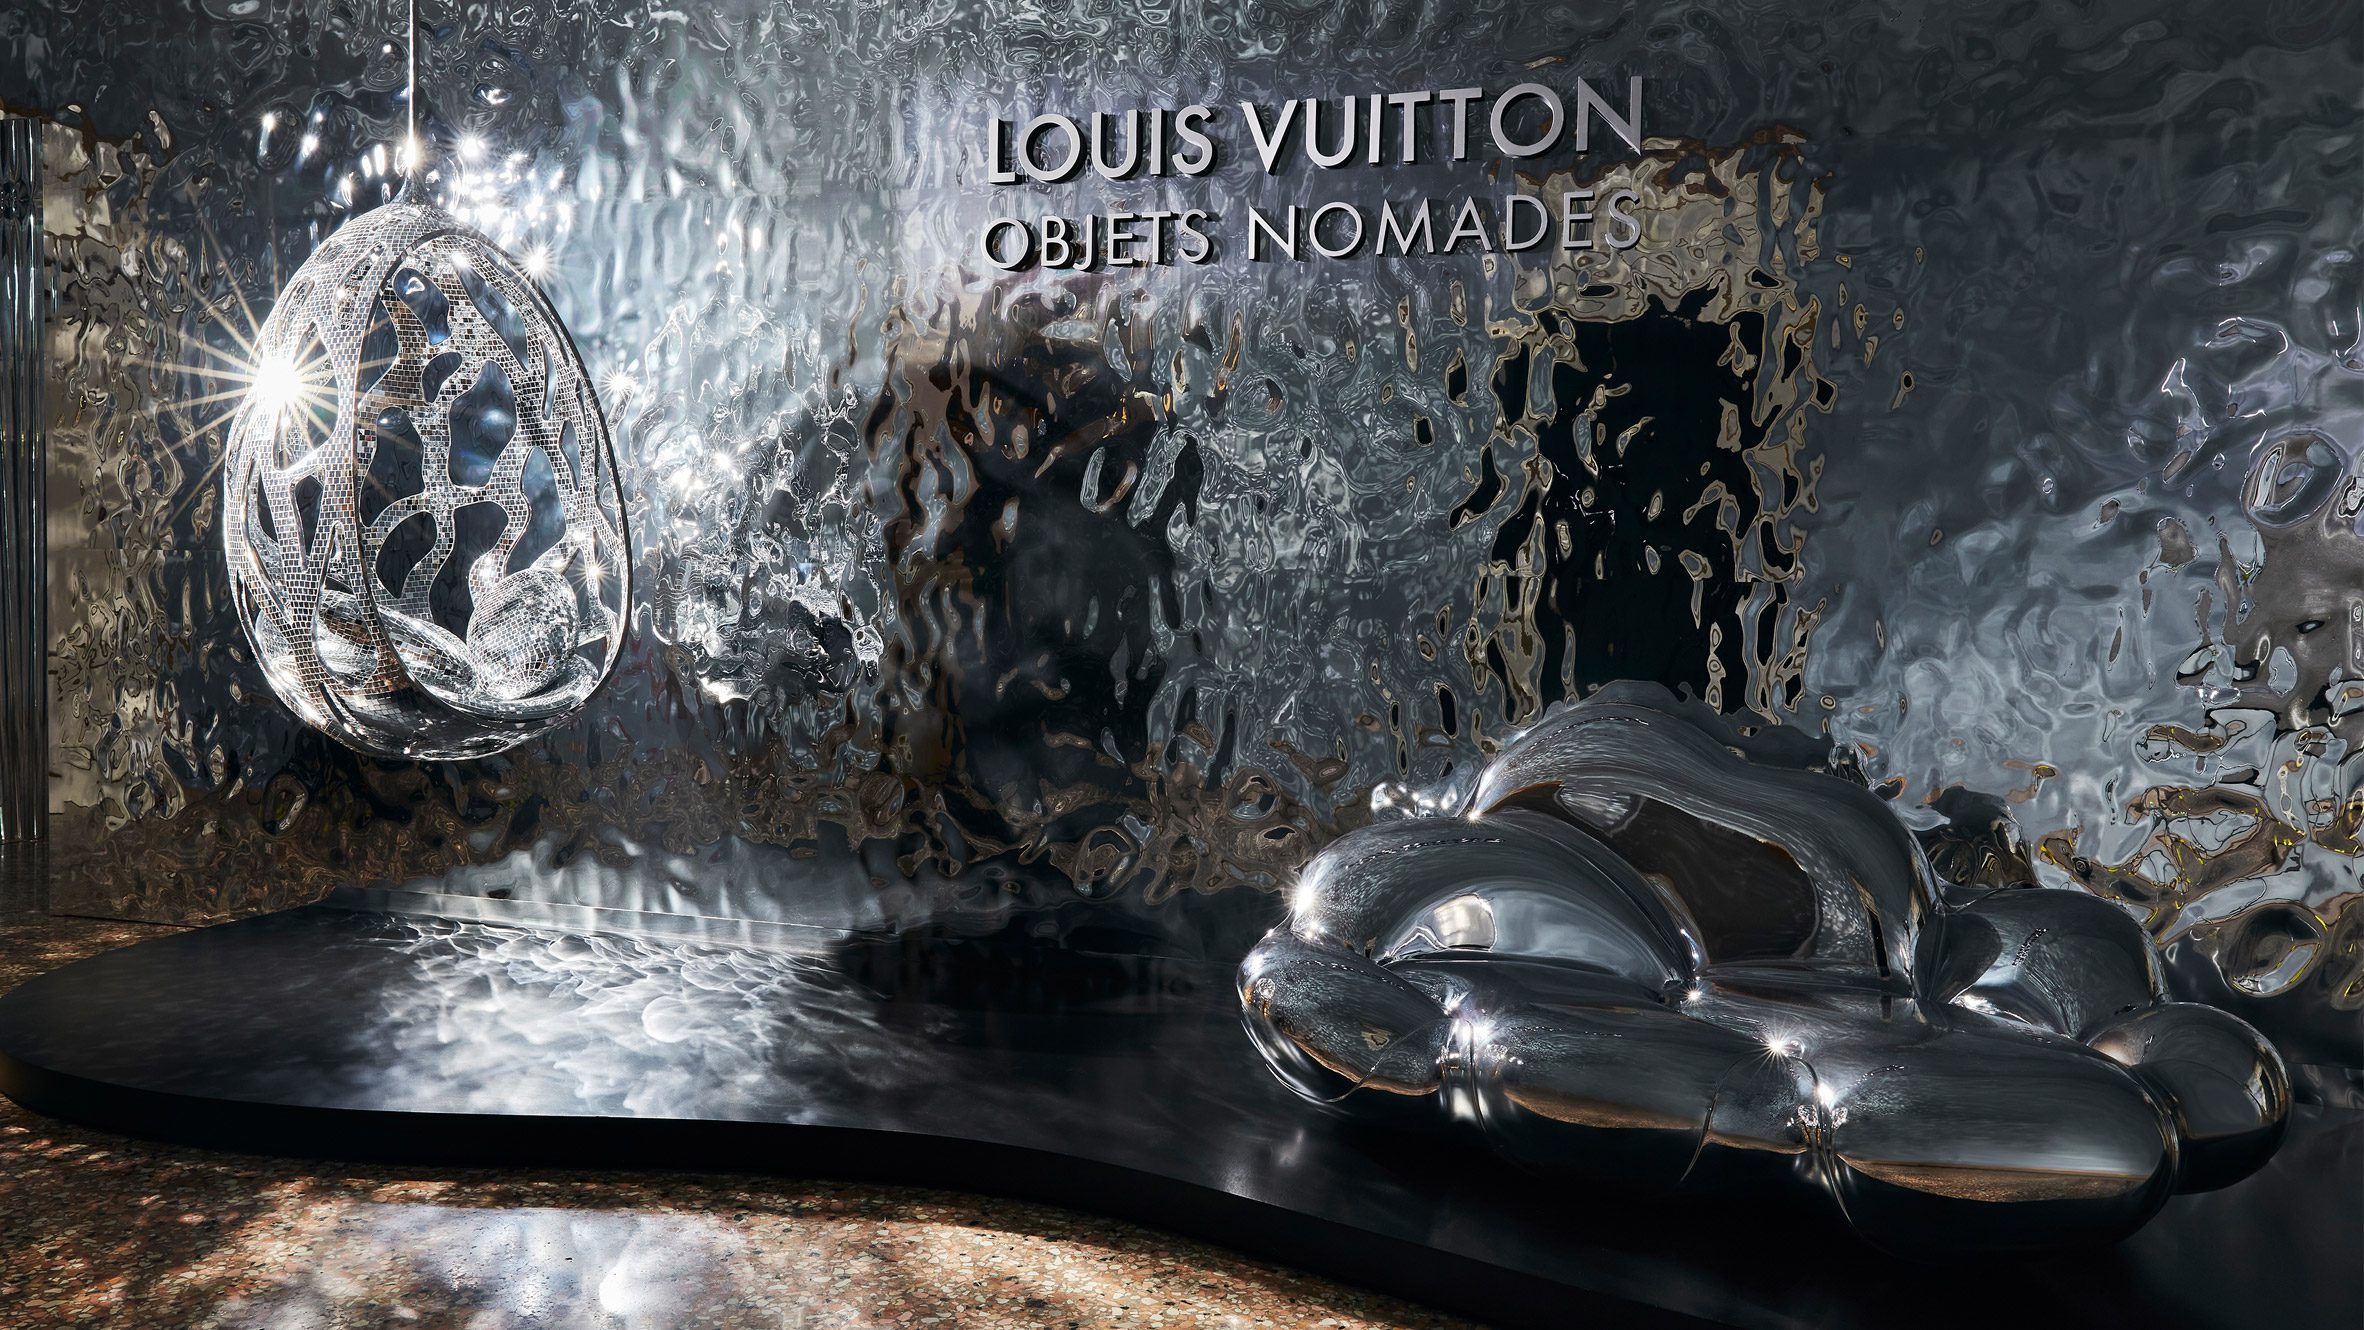 Reflective wall within Louis Vuitton Objets Nomades exhibition